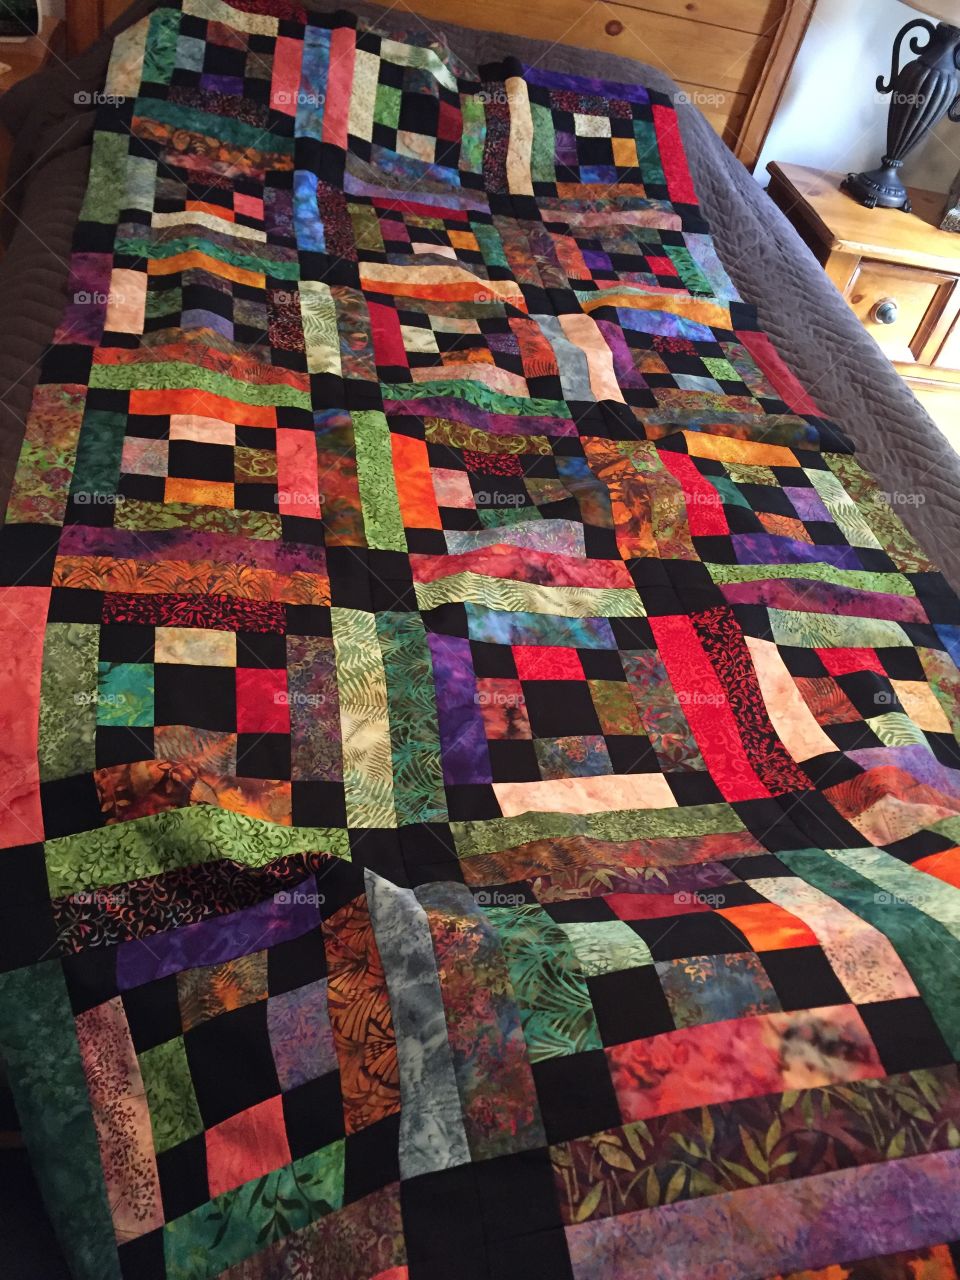 Quilt in the making